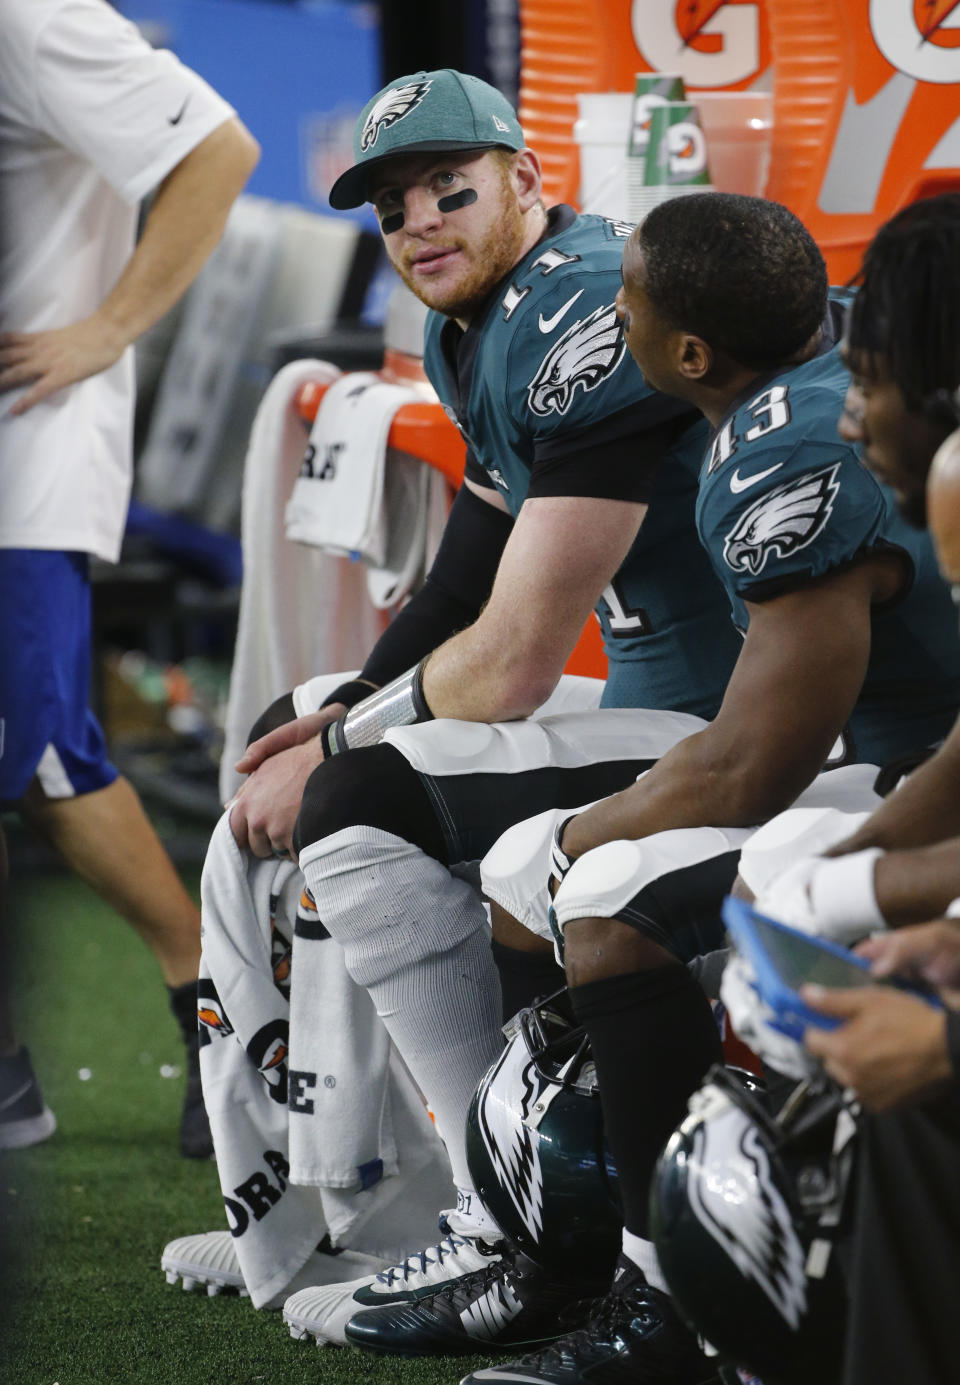 Philadelphia Eagles quarterback Carson Wentz (11) sits on the bench during the first half of an NFL football game against the Dallas Cowboys, in Arlington, Texas, Sunday, Dec. 9, 2018. (AP Photo/Michael Ainsworth)